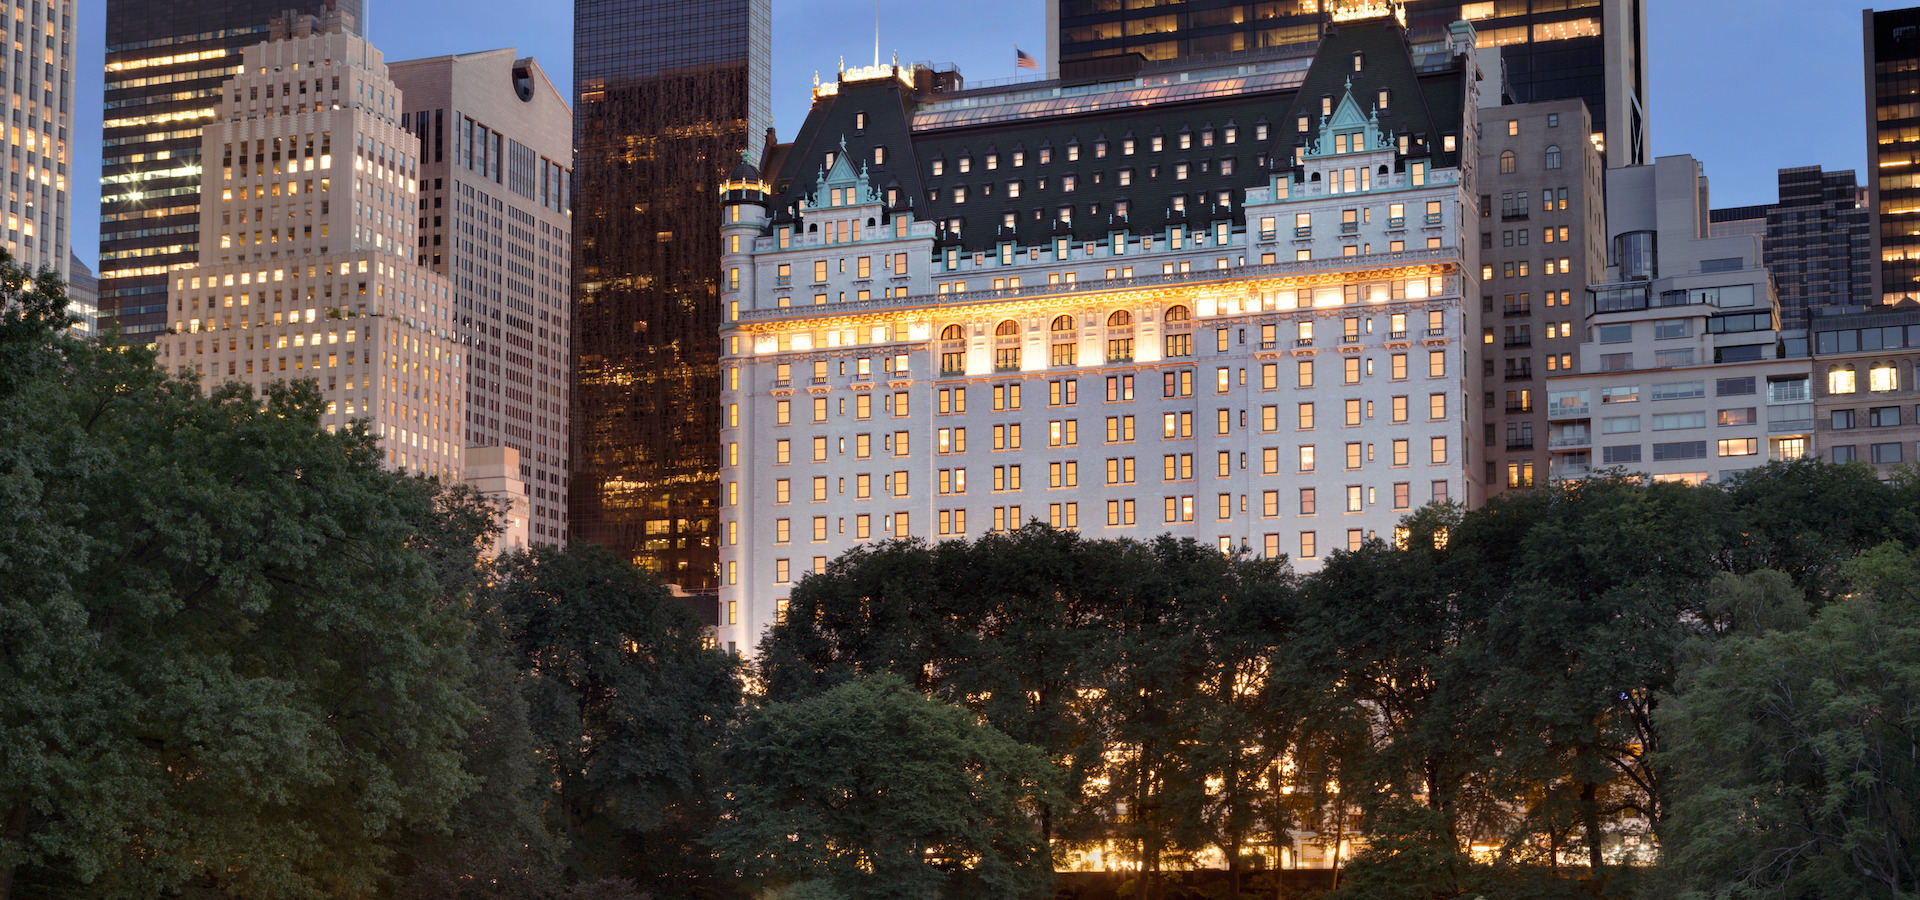 Luxury Hotel Near Central Park 5 Star Hotel In Nyc The Plaza Hotel